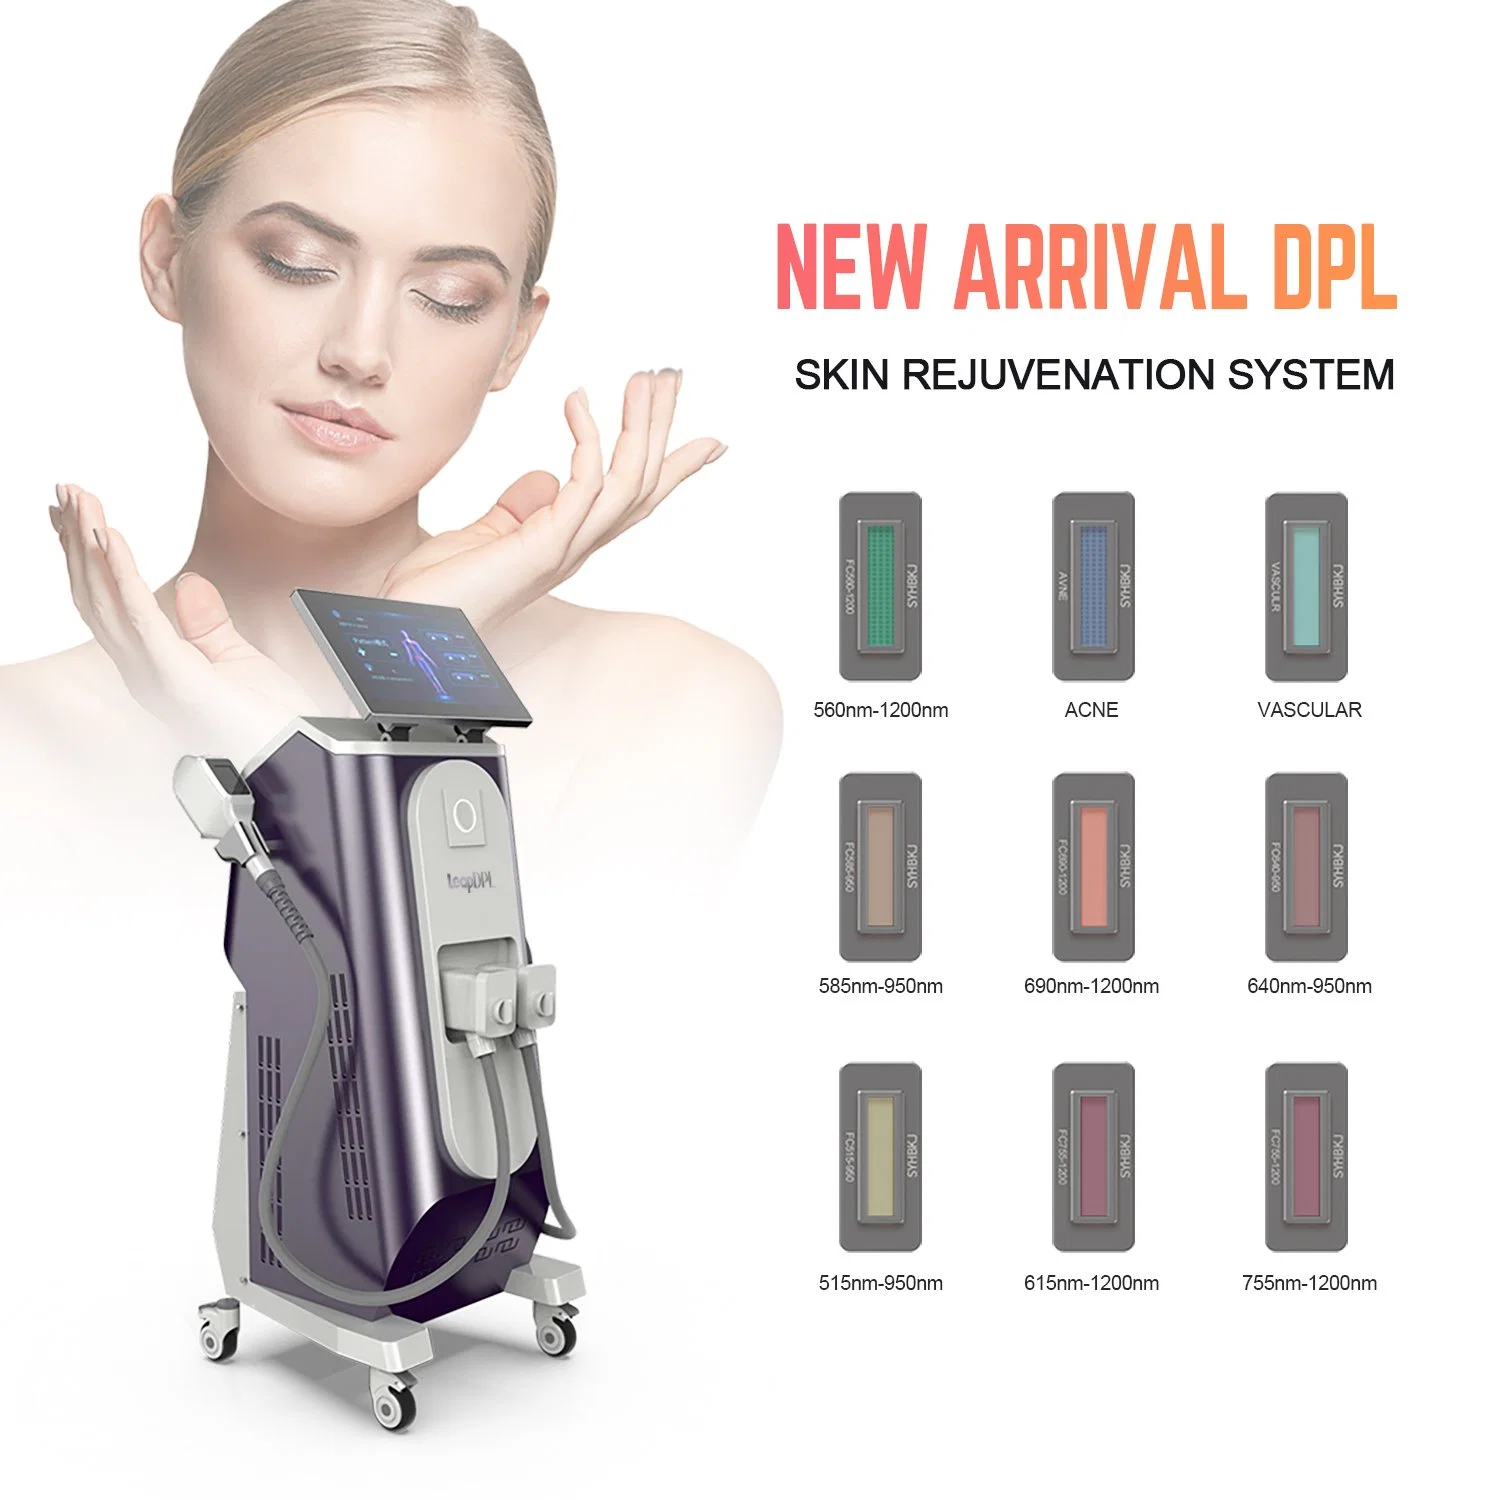 Dpl Laser Picoseconde Professional Elight + RF + ND YAG Laser 3 in 1 Opt Machine IPL Elight Hair Removal Beauty Salon Equipment